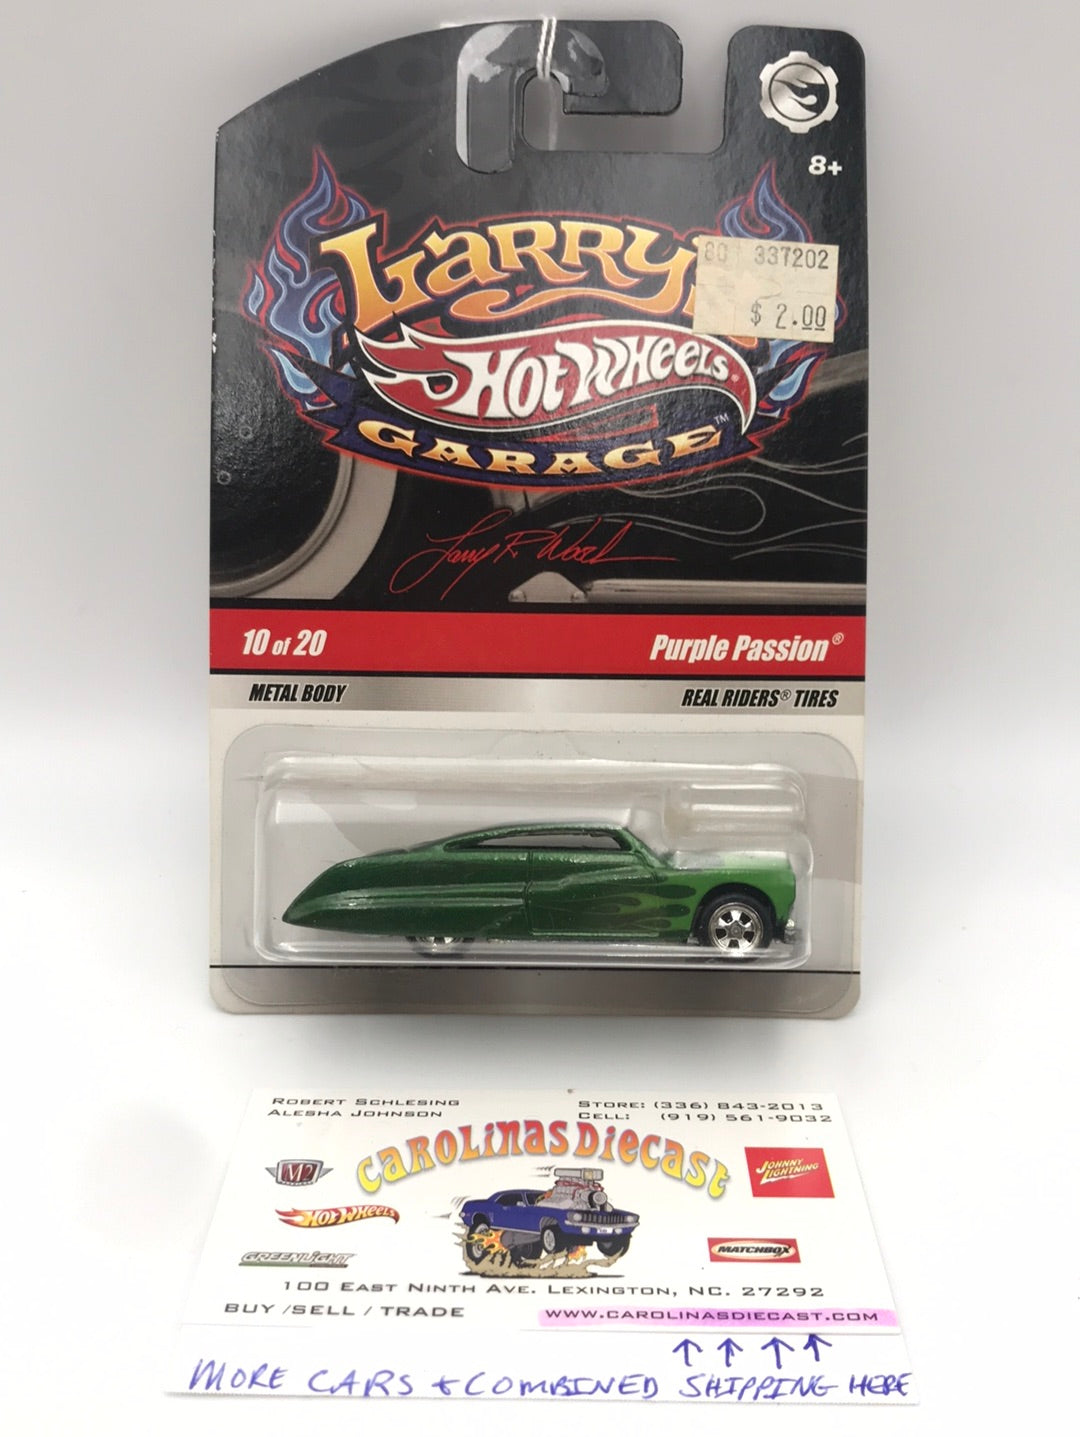 Hot wheels Larrys garage 10 of 20 Purple Passion real riders HH3